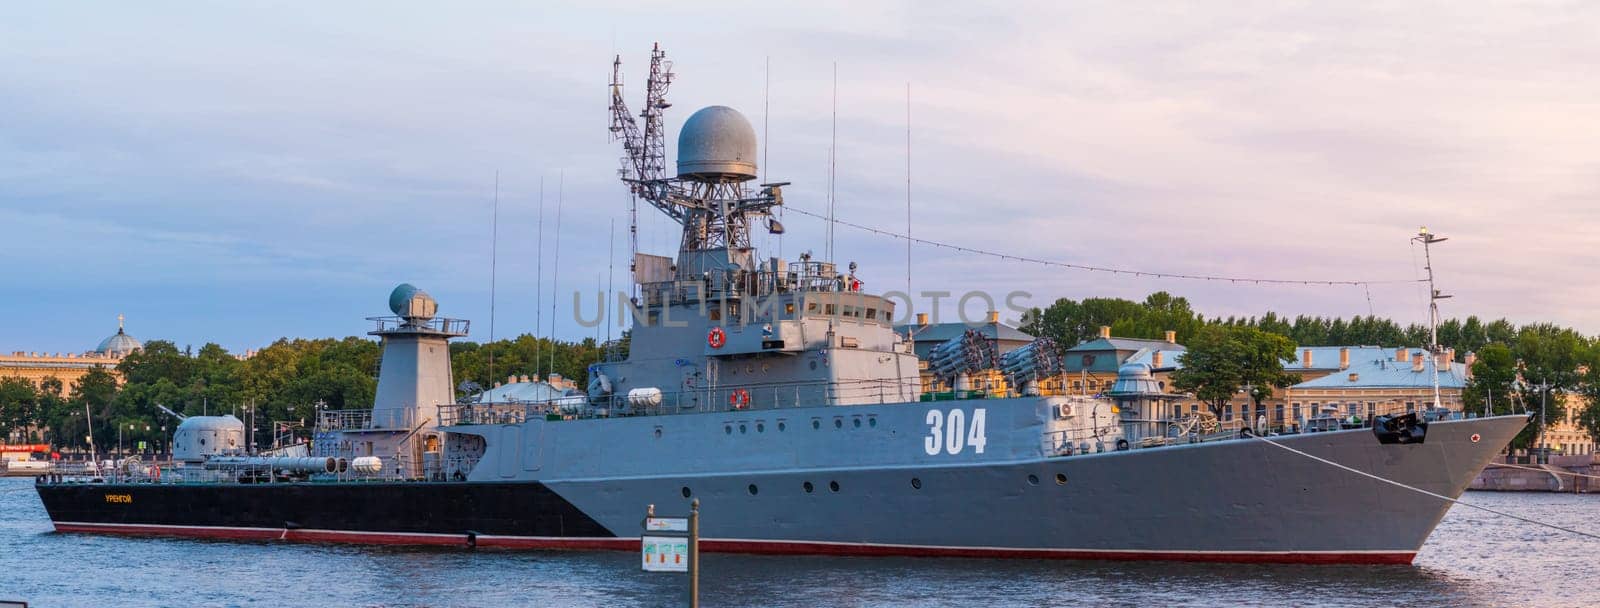 Small anti-submarine ship of project 133.1 Urengoy in Neva river in Saint-Petersburg at summer morning by z1b